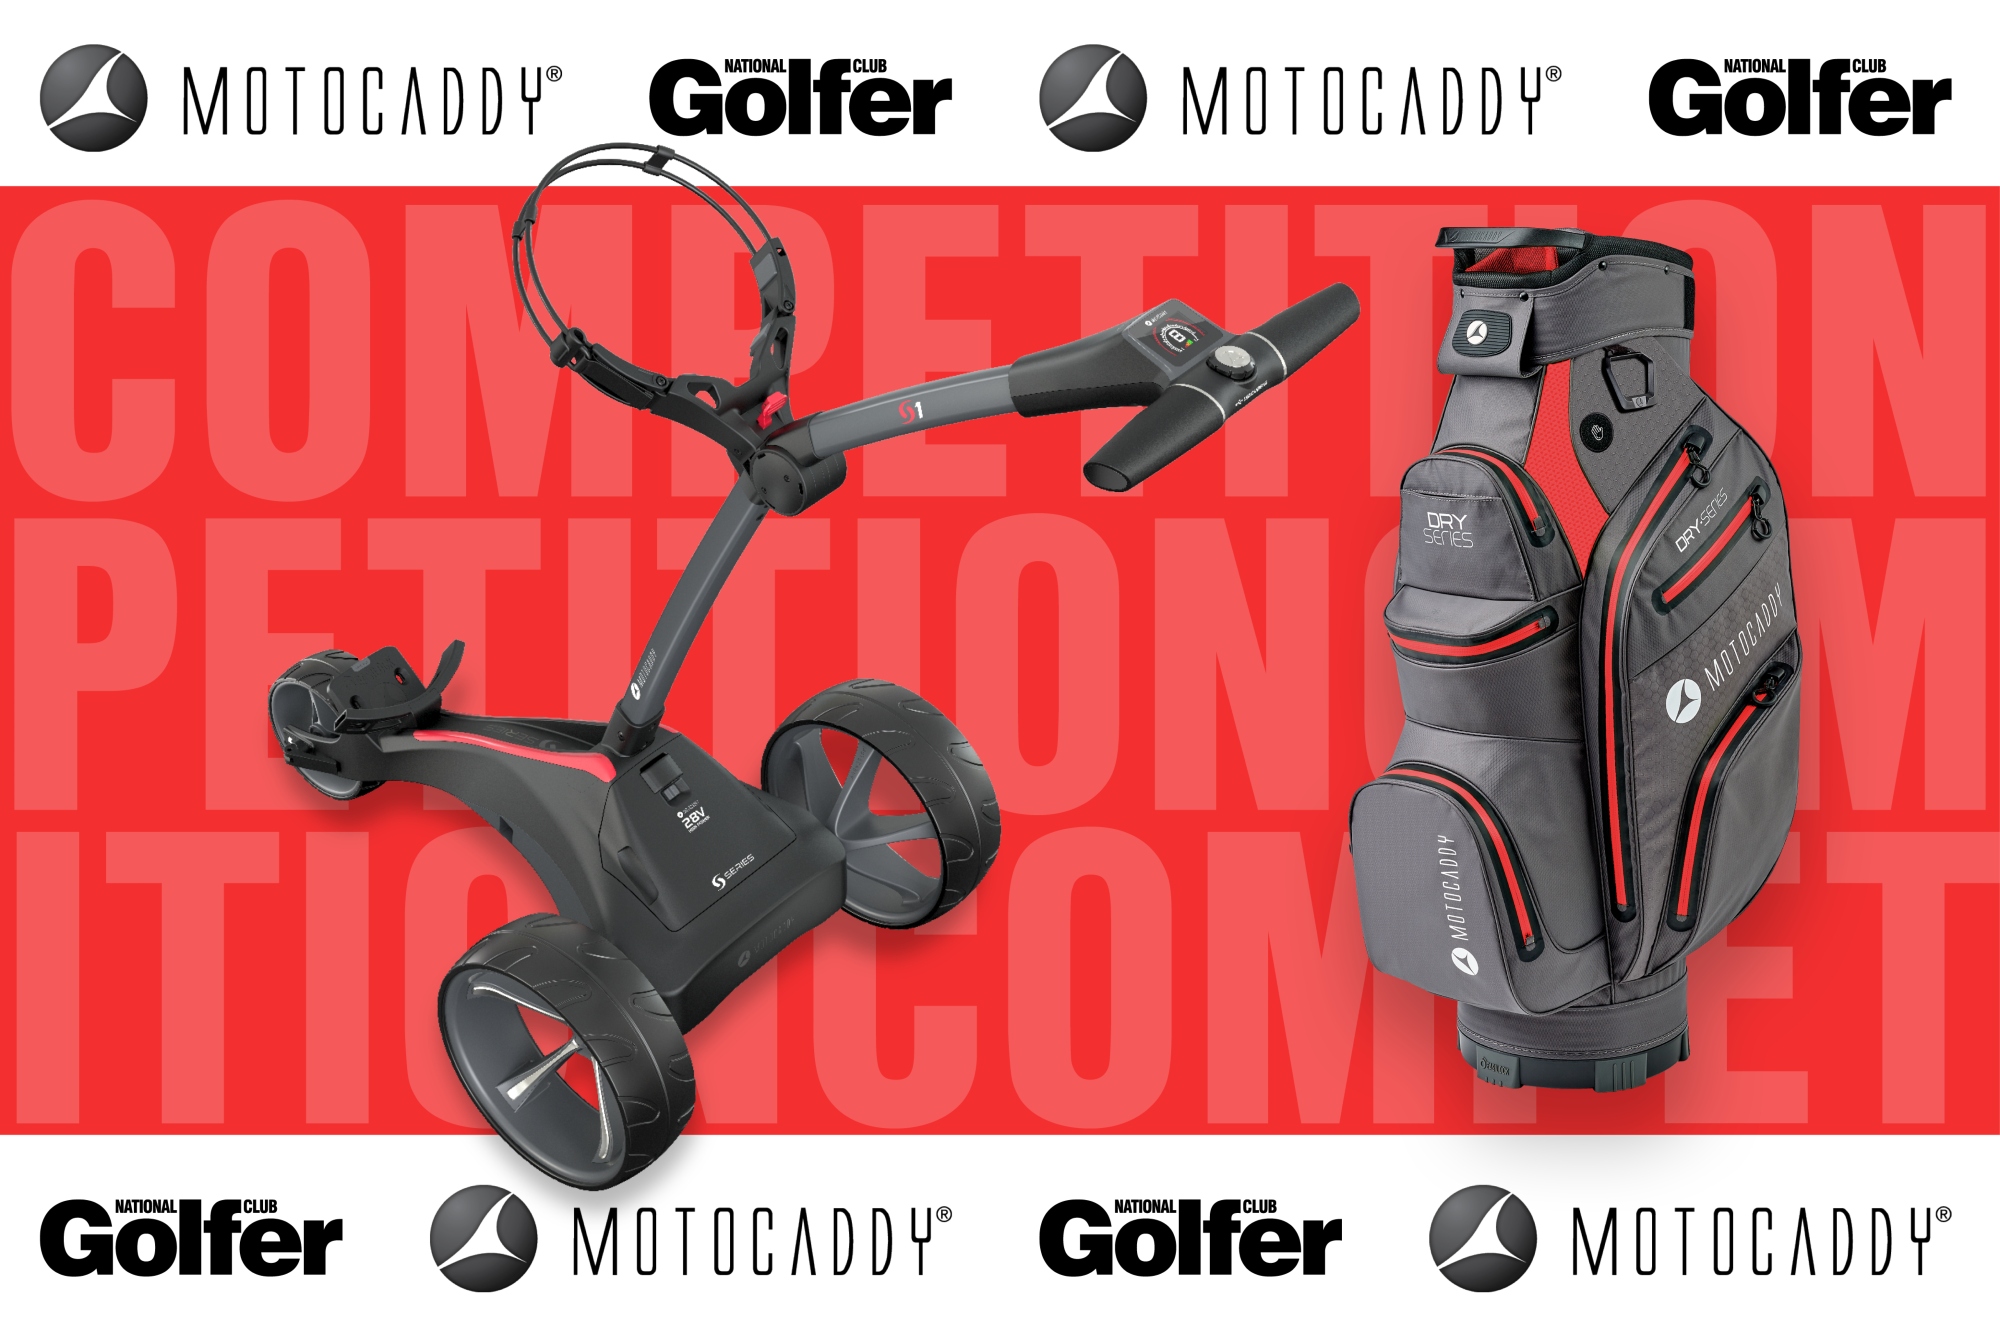 WIN! A new Motocaddy S1 electric trolley & Dry-Series bag worth £850